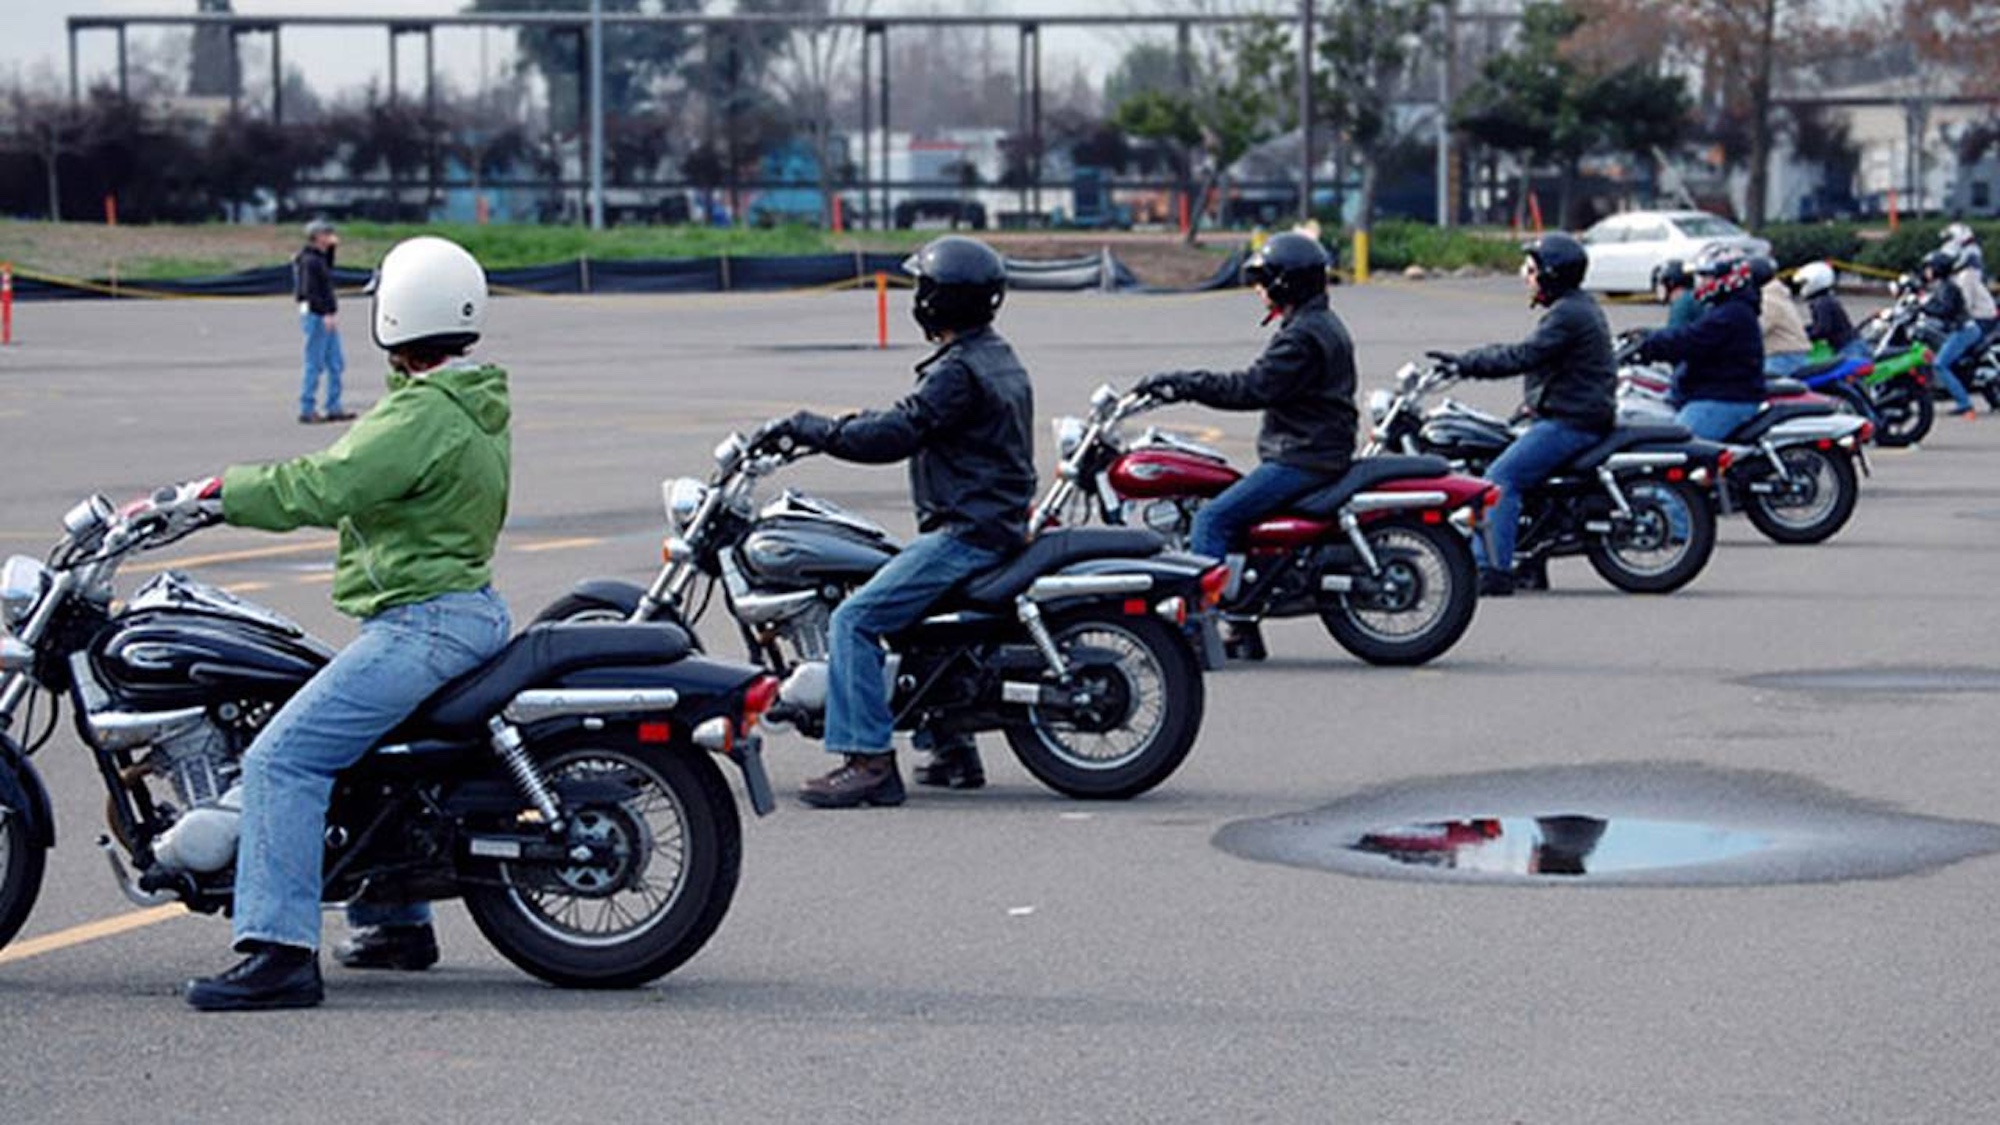 A view of a motorcycle training class. Media provided by RideApart.